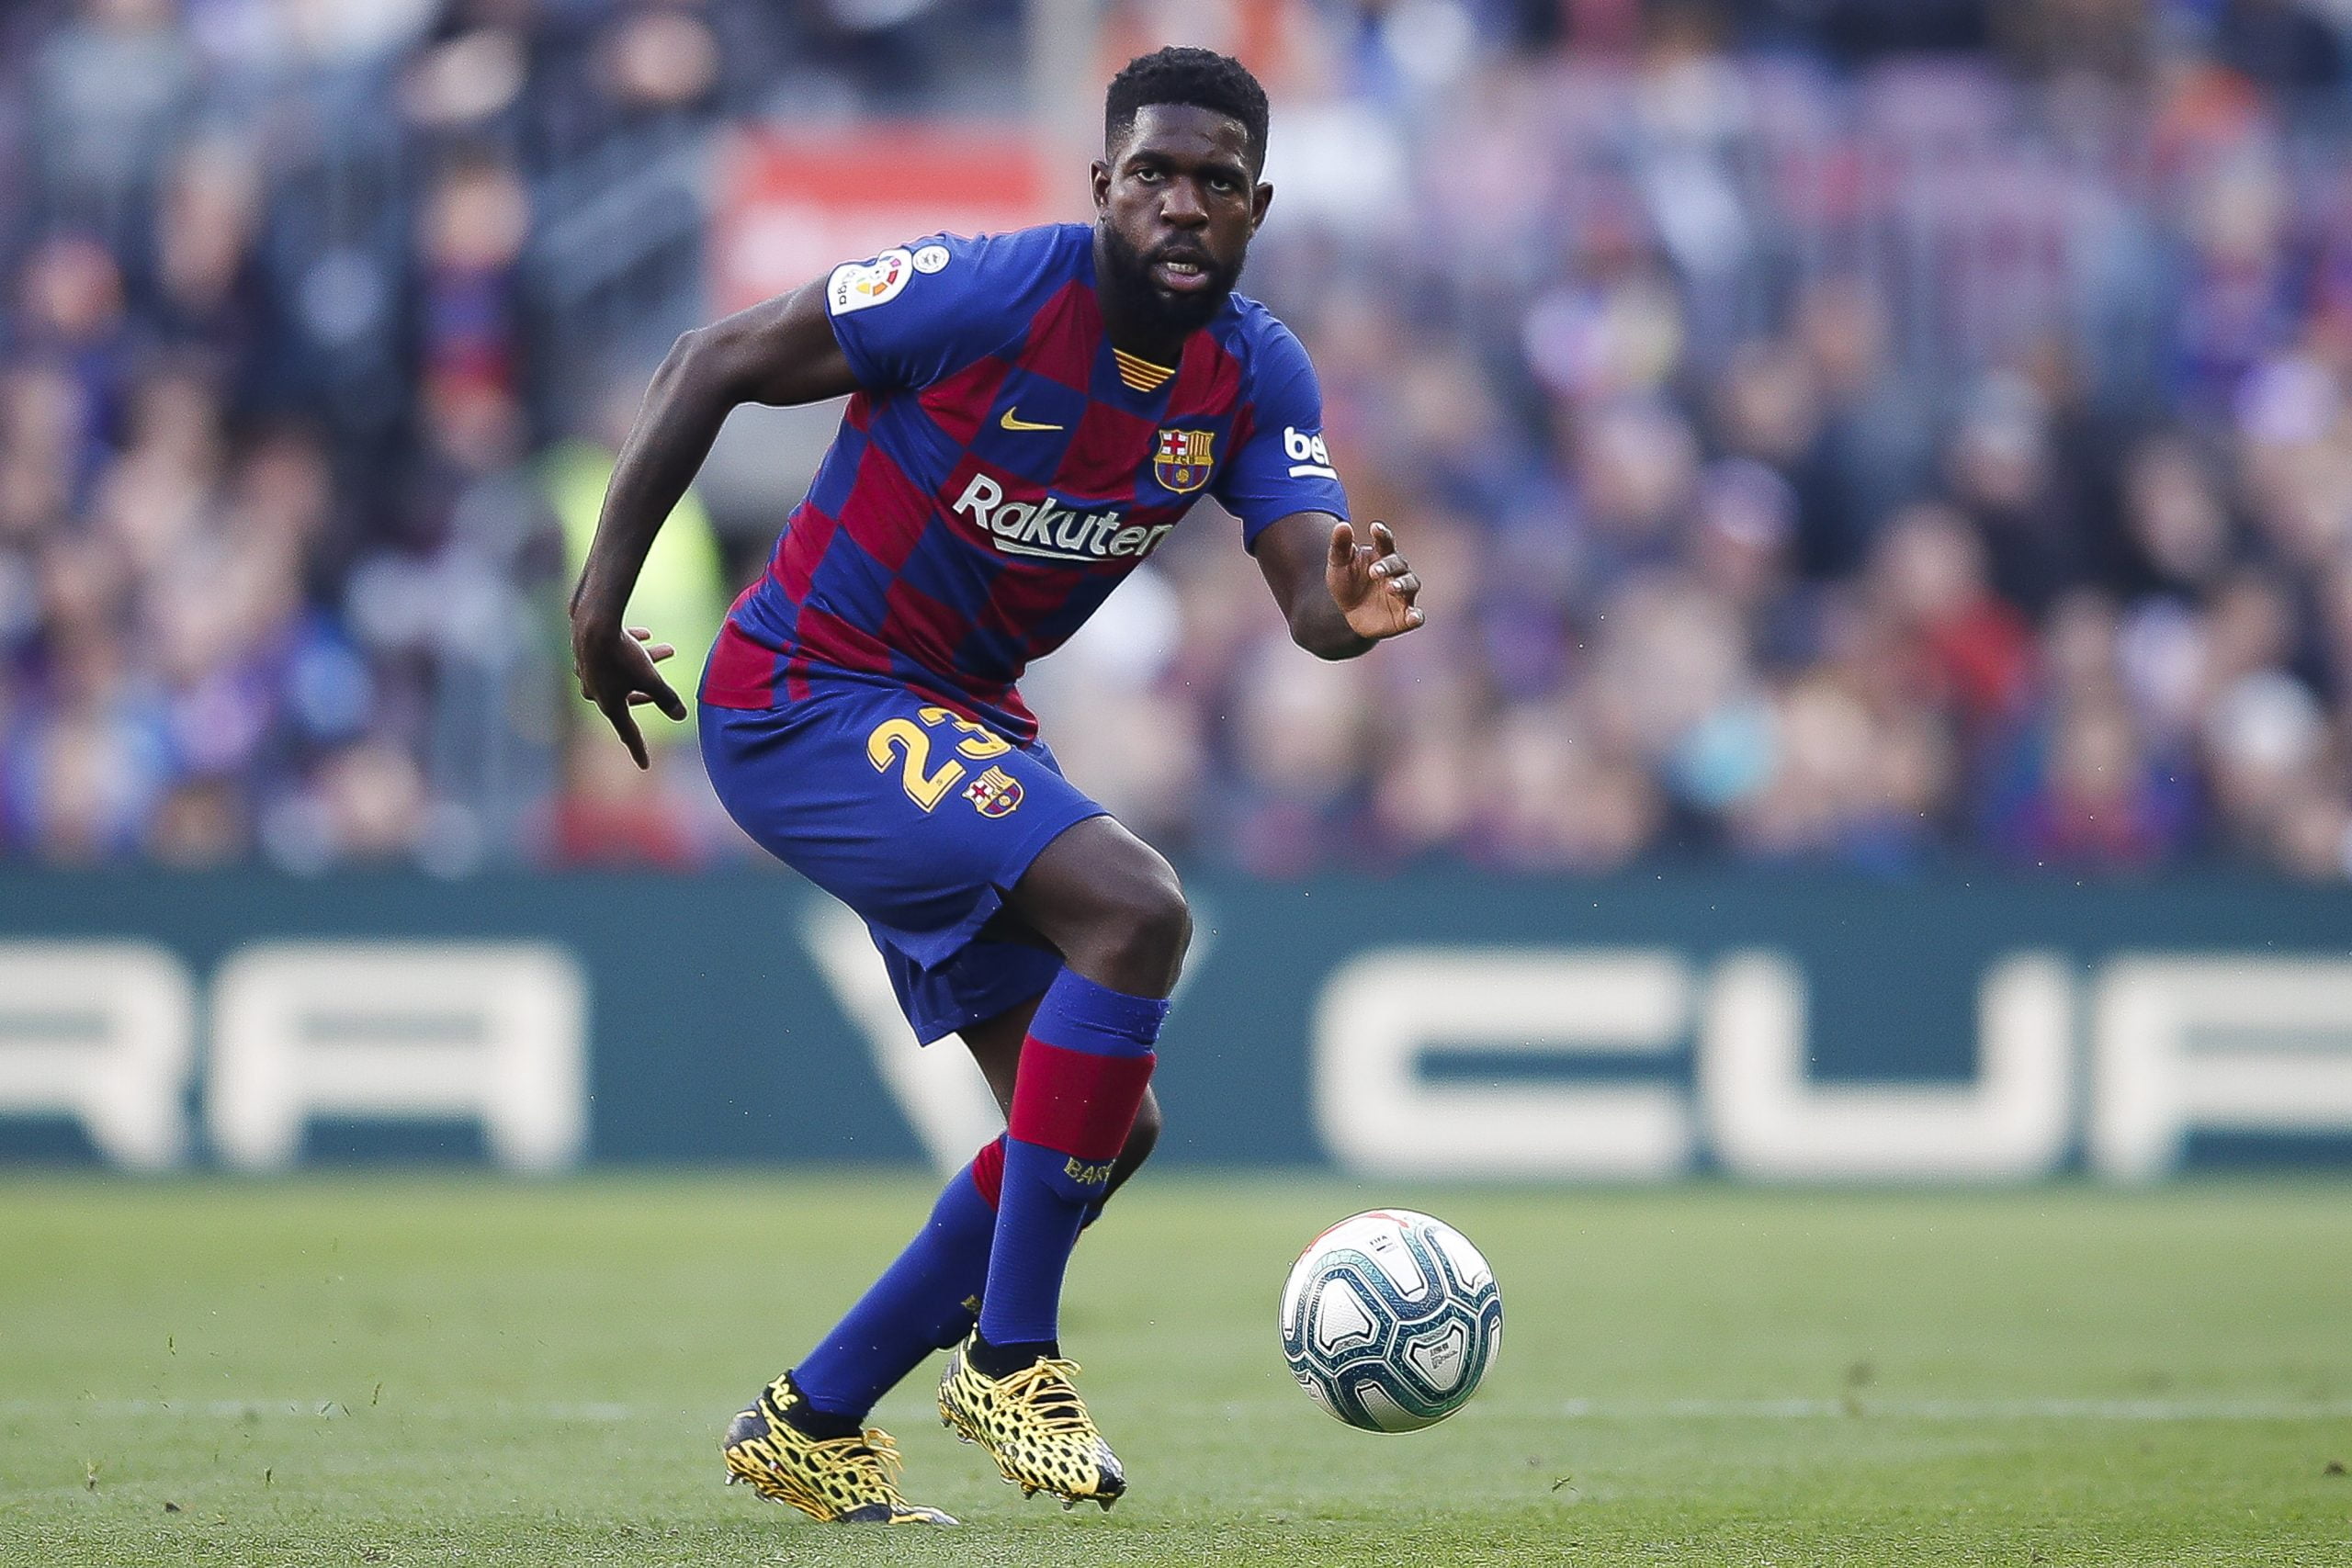 BARCELONA, SPAIN - FEBRUARY 15: Samuel Umtiti of FC Barcelona controls the ball during the Liga match between FC Barcelona and Getafe CF at Camp Nou on February 15, 2020 in Barcelona, Spain. (Photo by Eric Alonso/Getty Images)